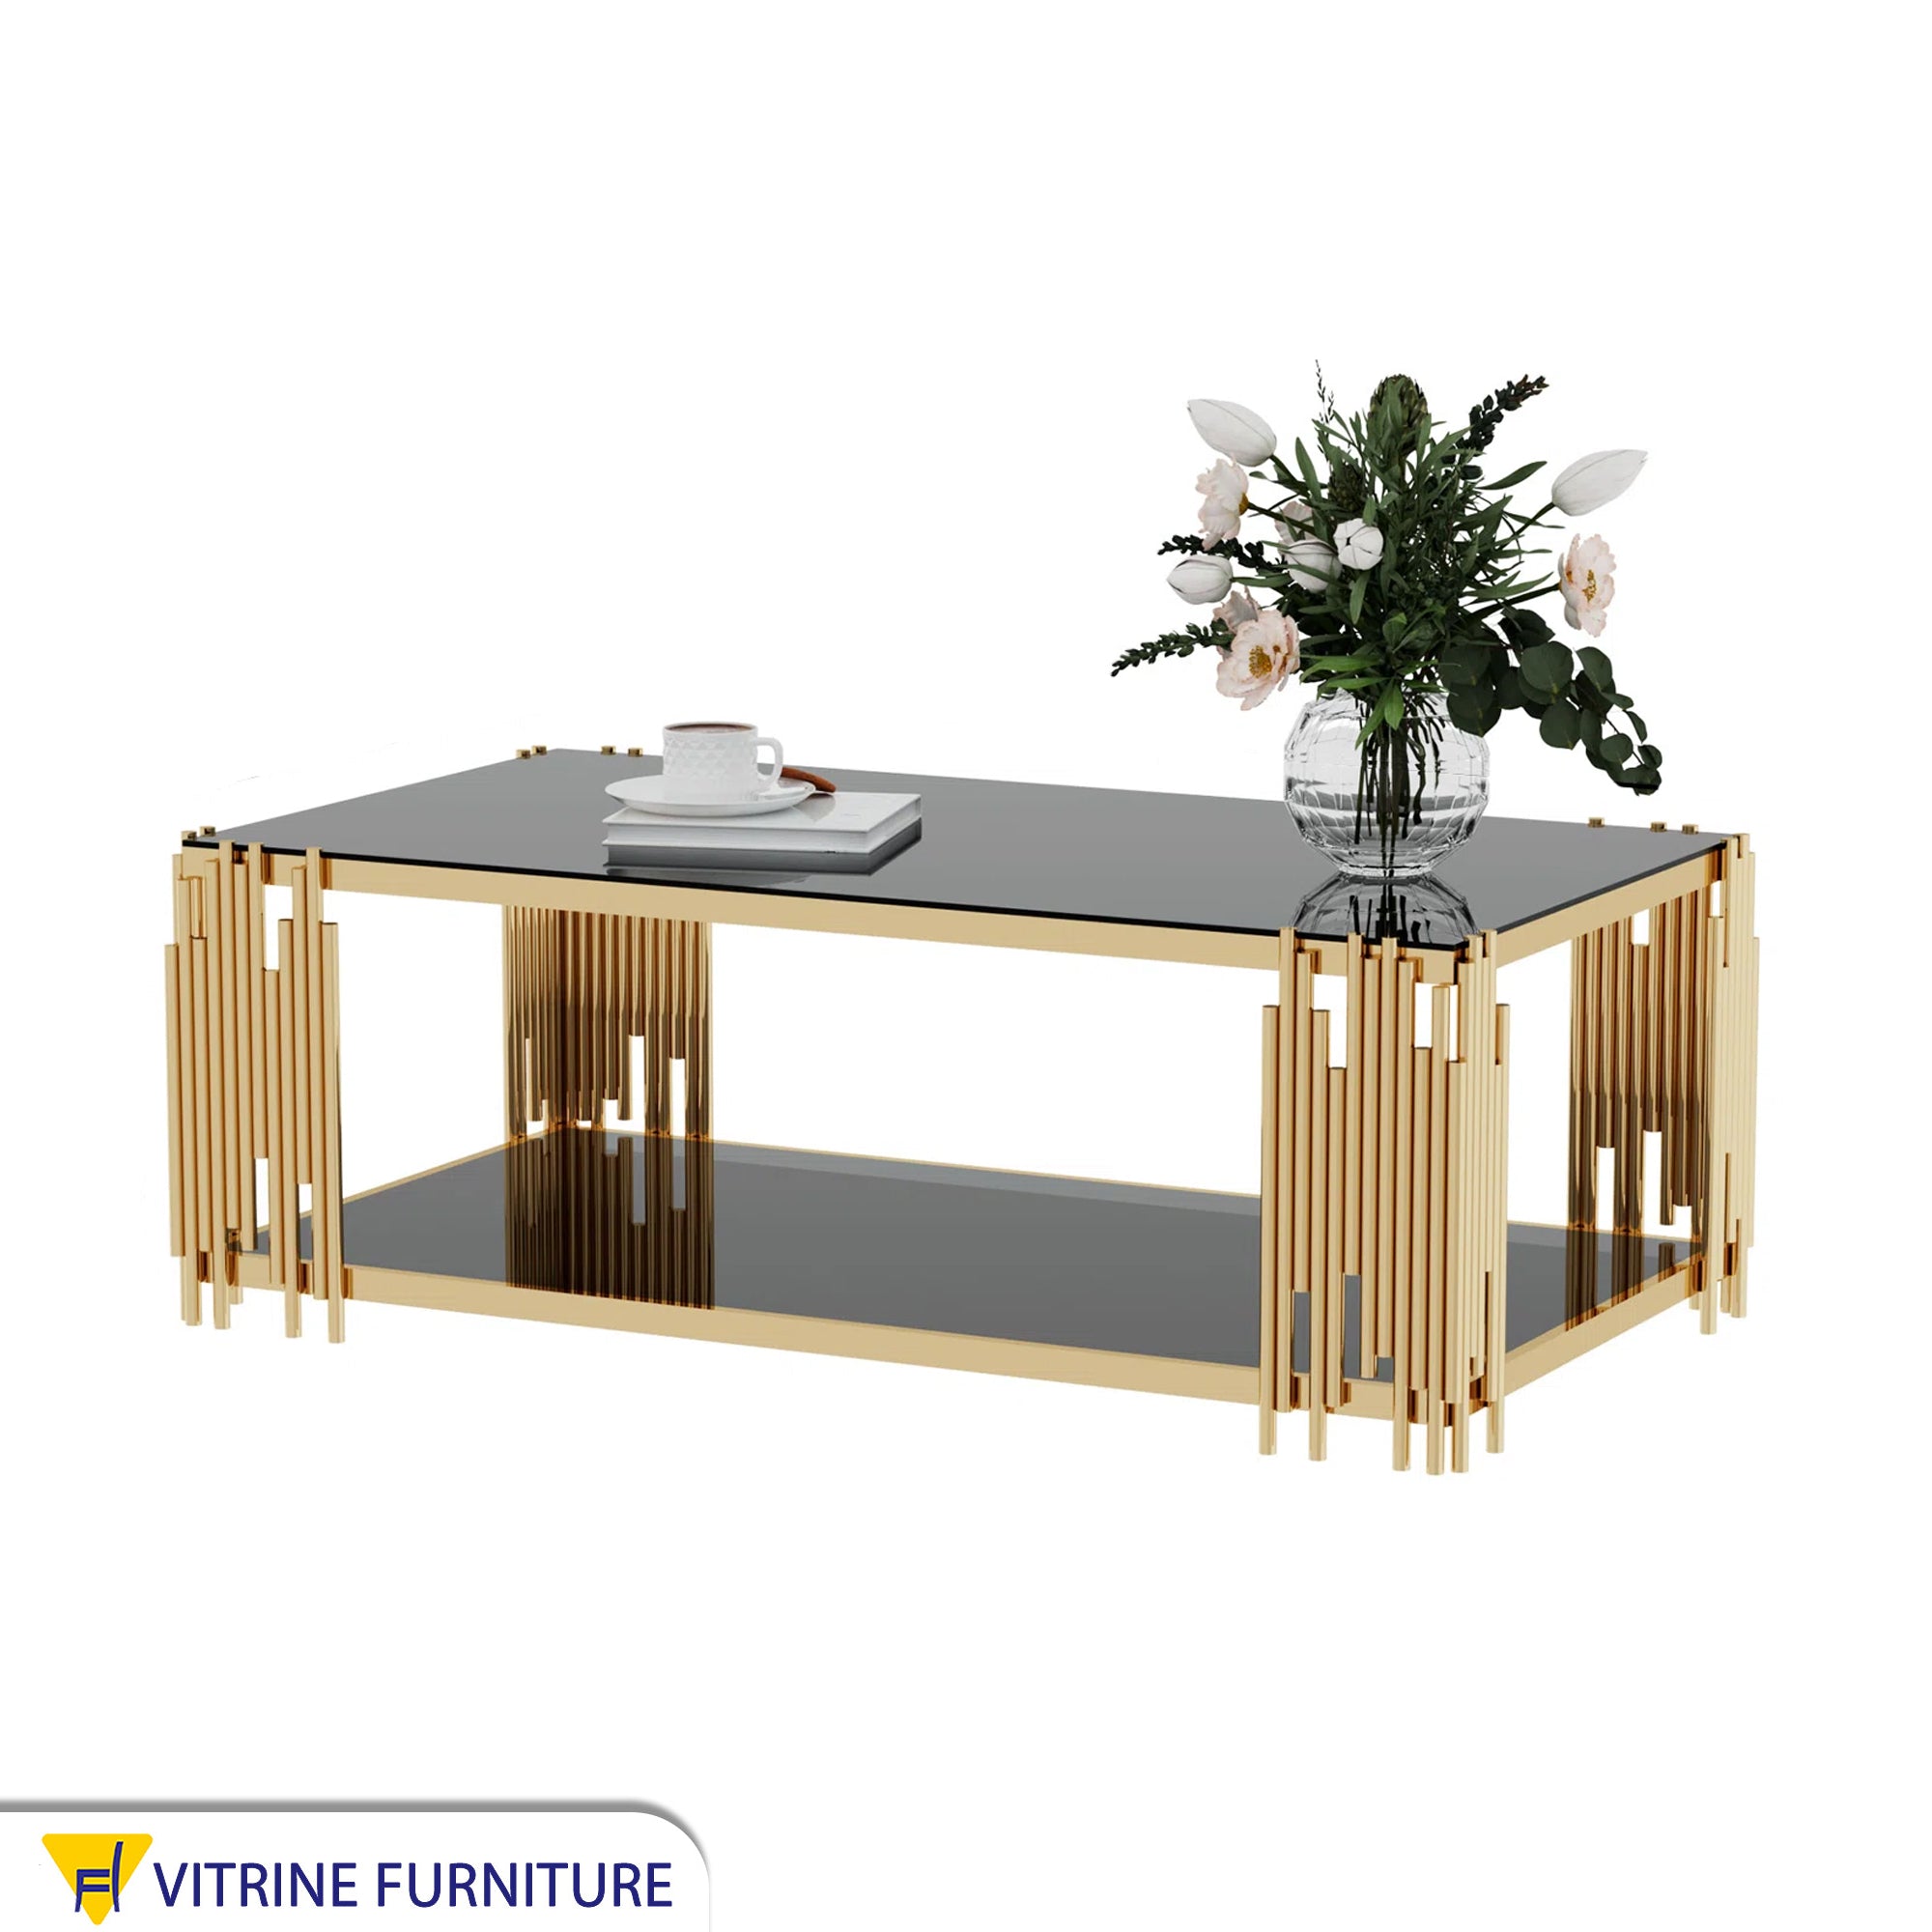 A rectangular table in gold with a top and bottom